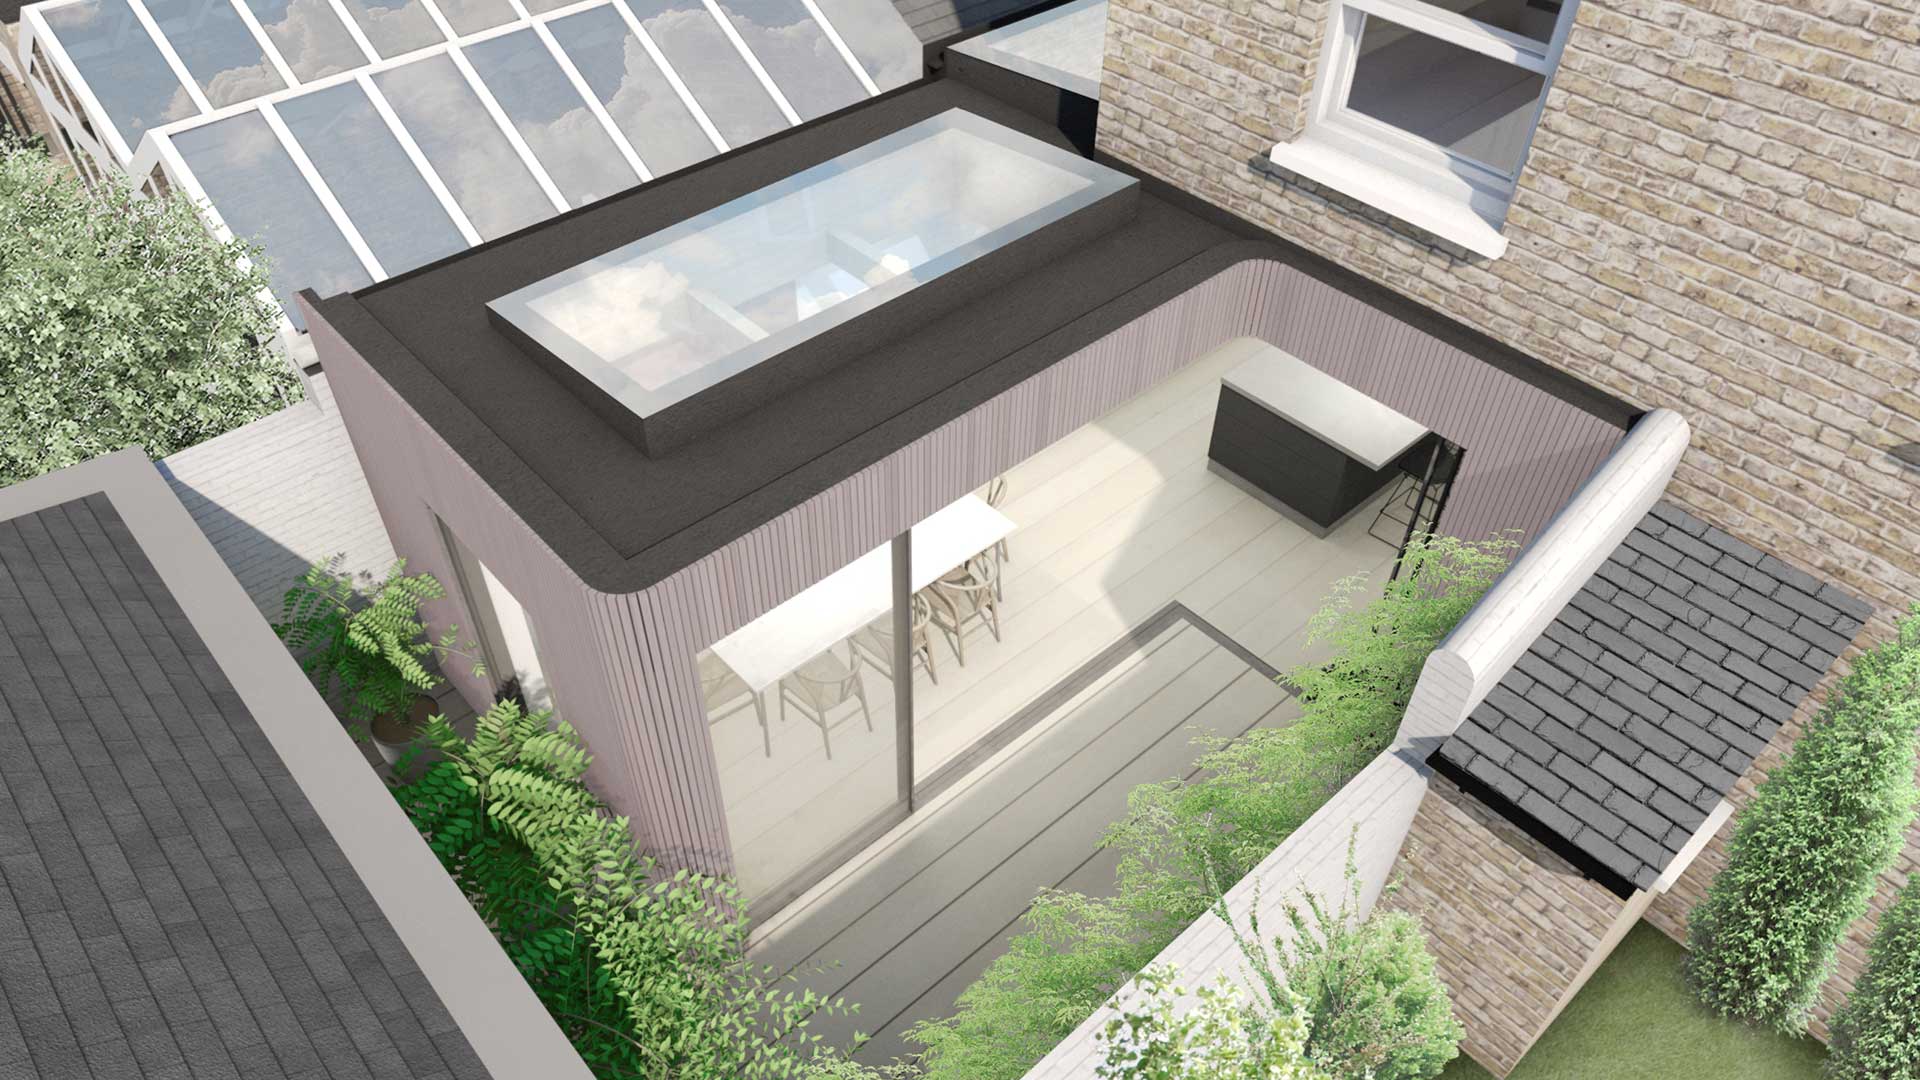 Stormont Road Clapham Opening-Up And Extension Of Ground Floor, First Floor Reconfiguration And Loft Extension 01